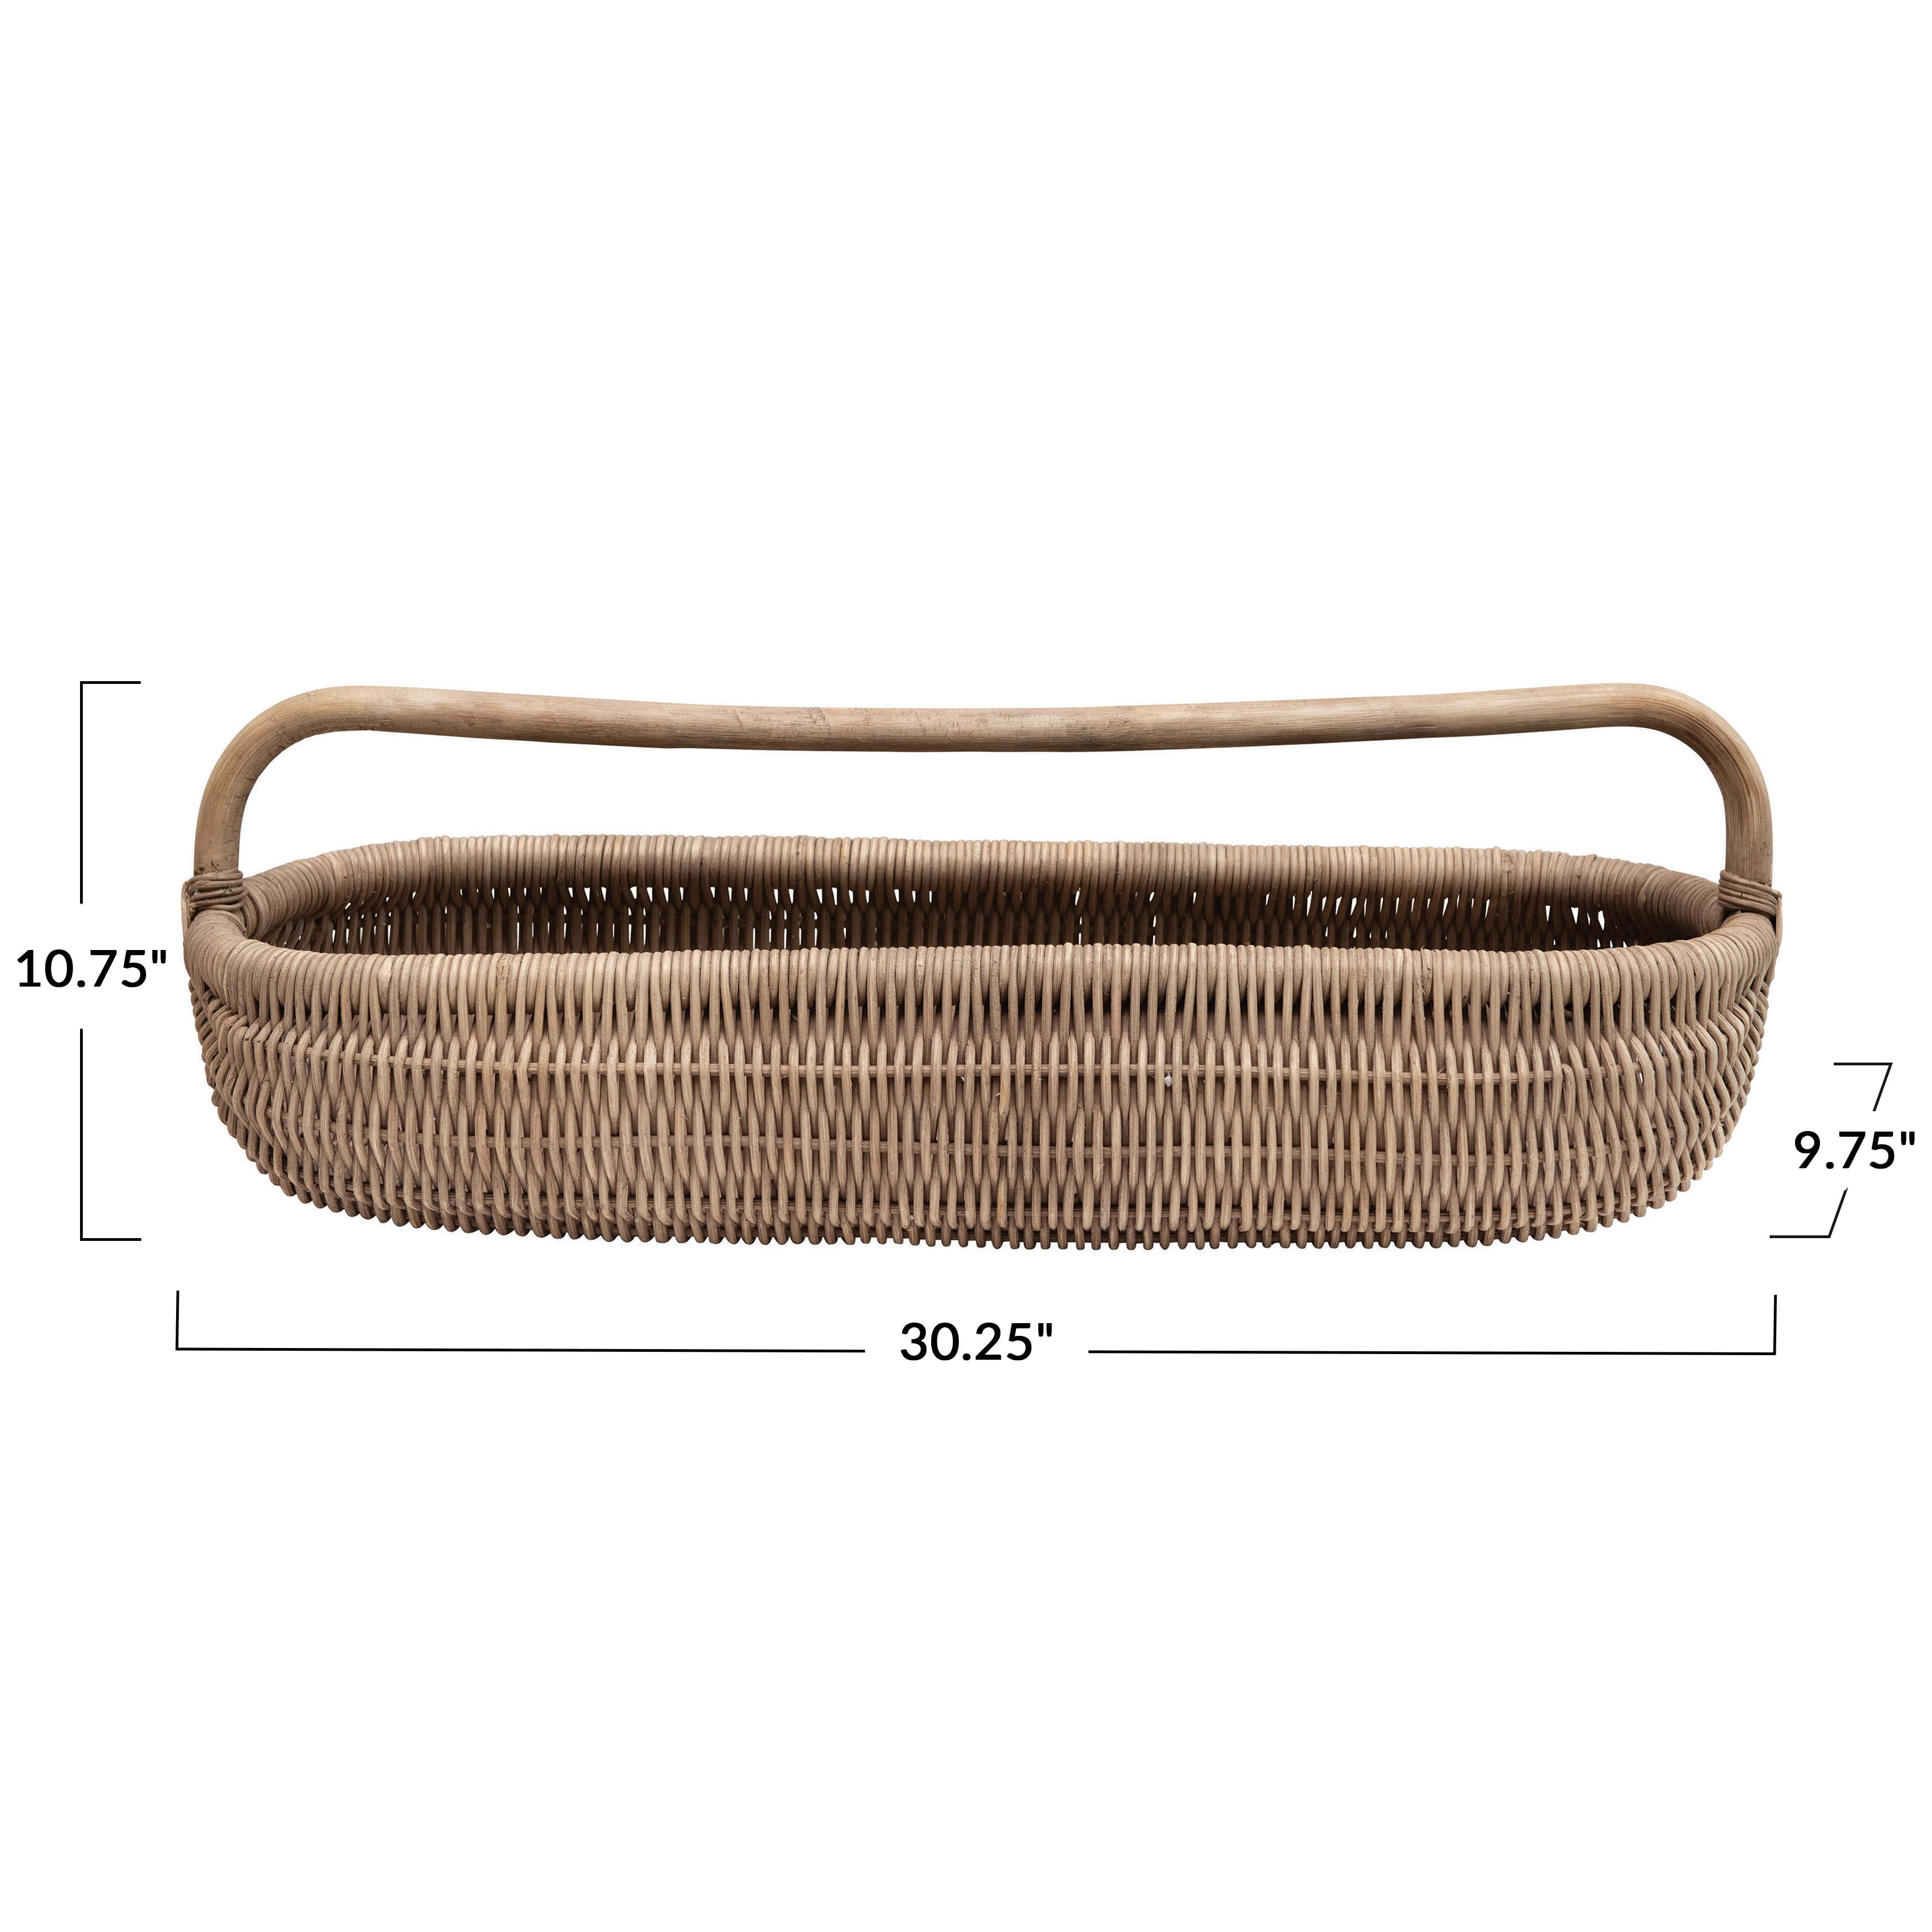 Natural Hand-Woven Rattan Basket with Handle